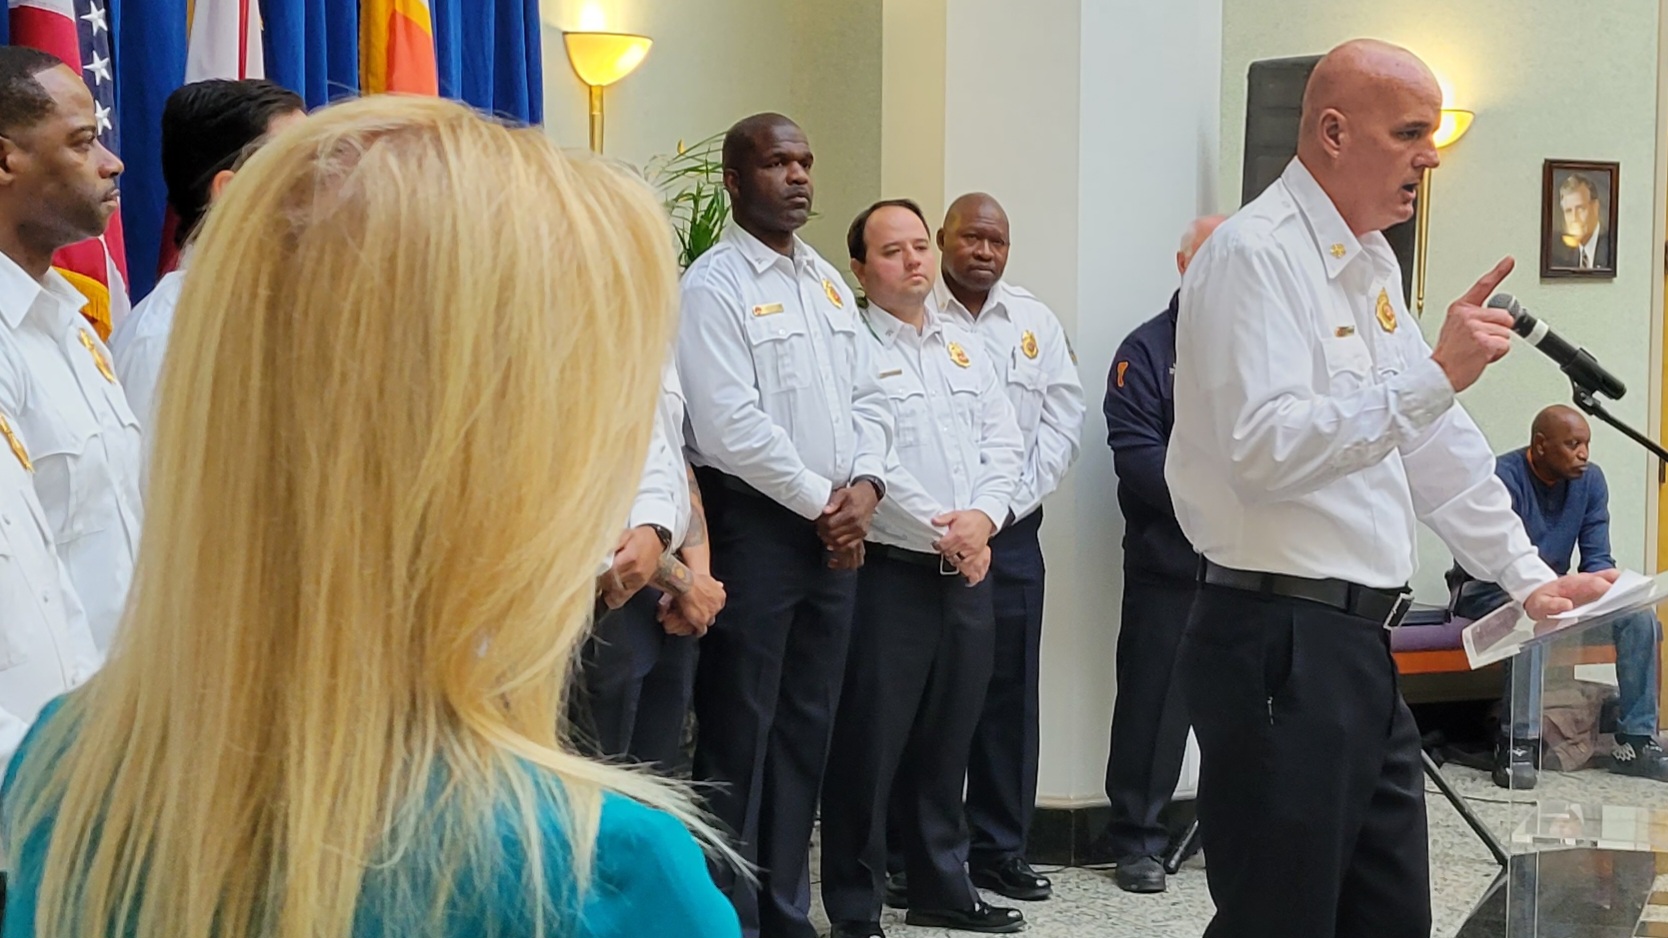 Featured image for “Fire department reorganized to increase diversity”